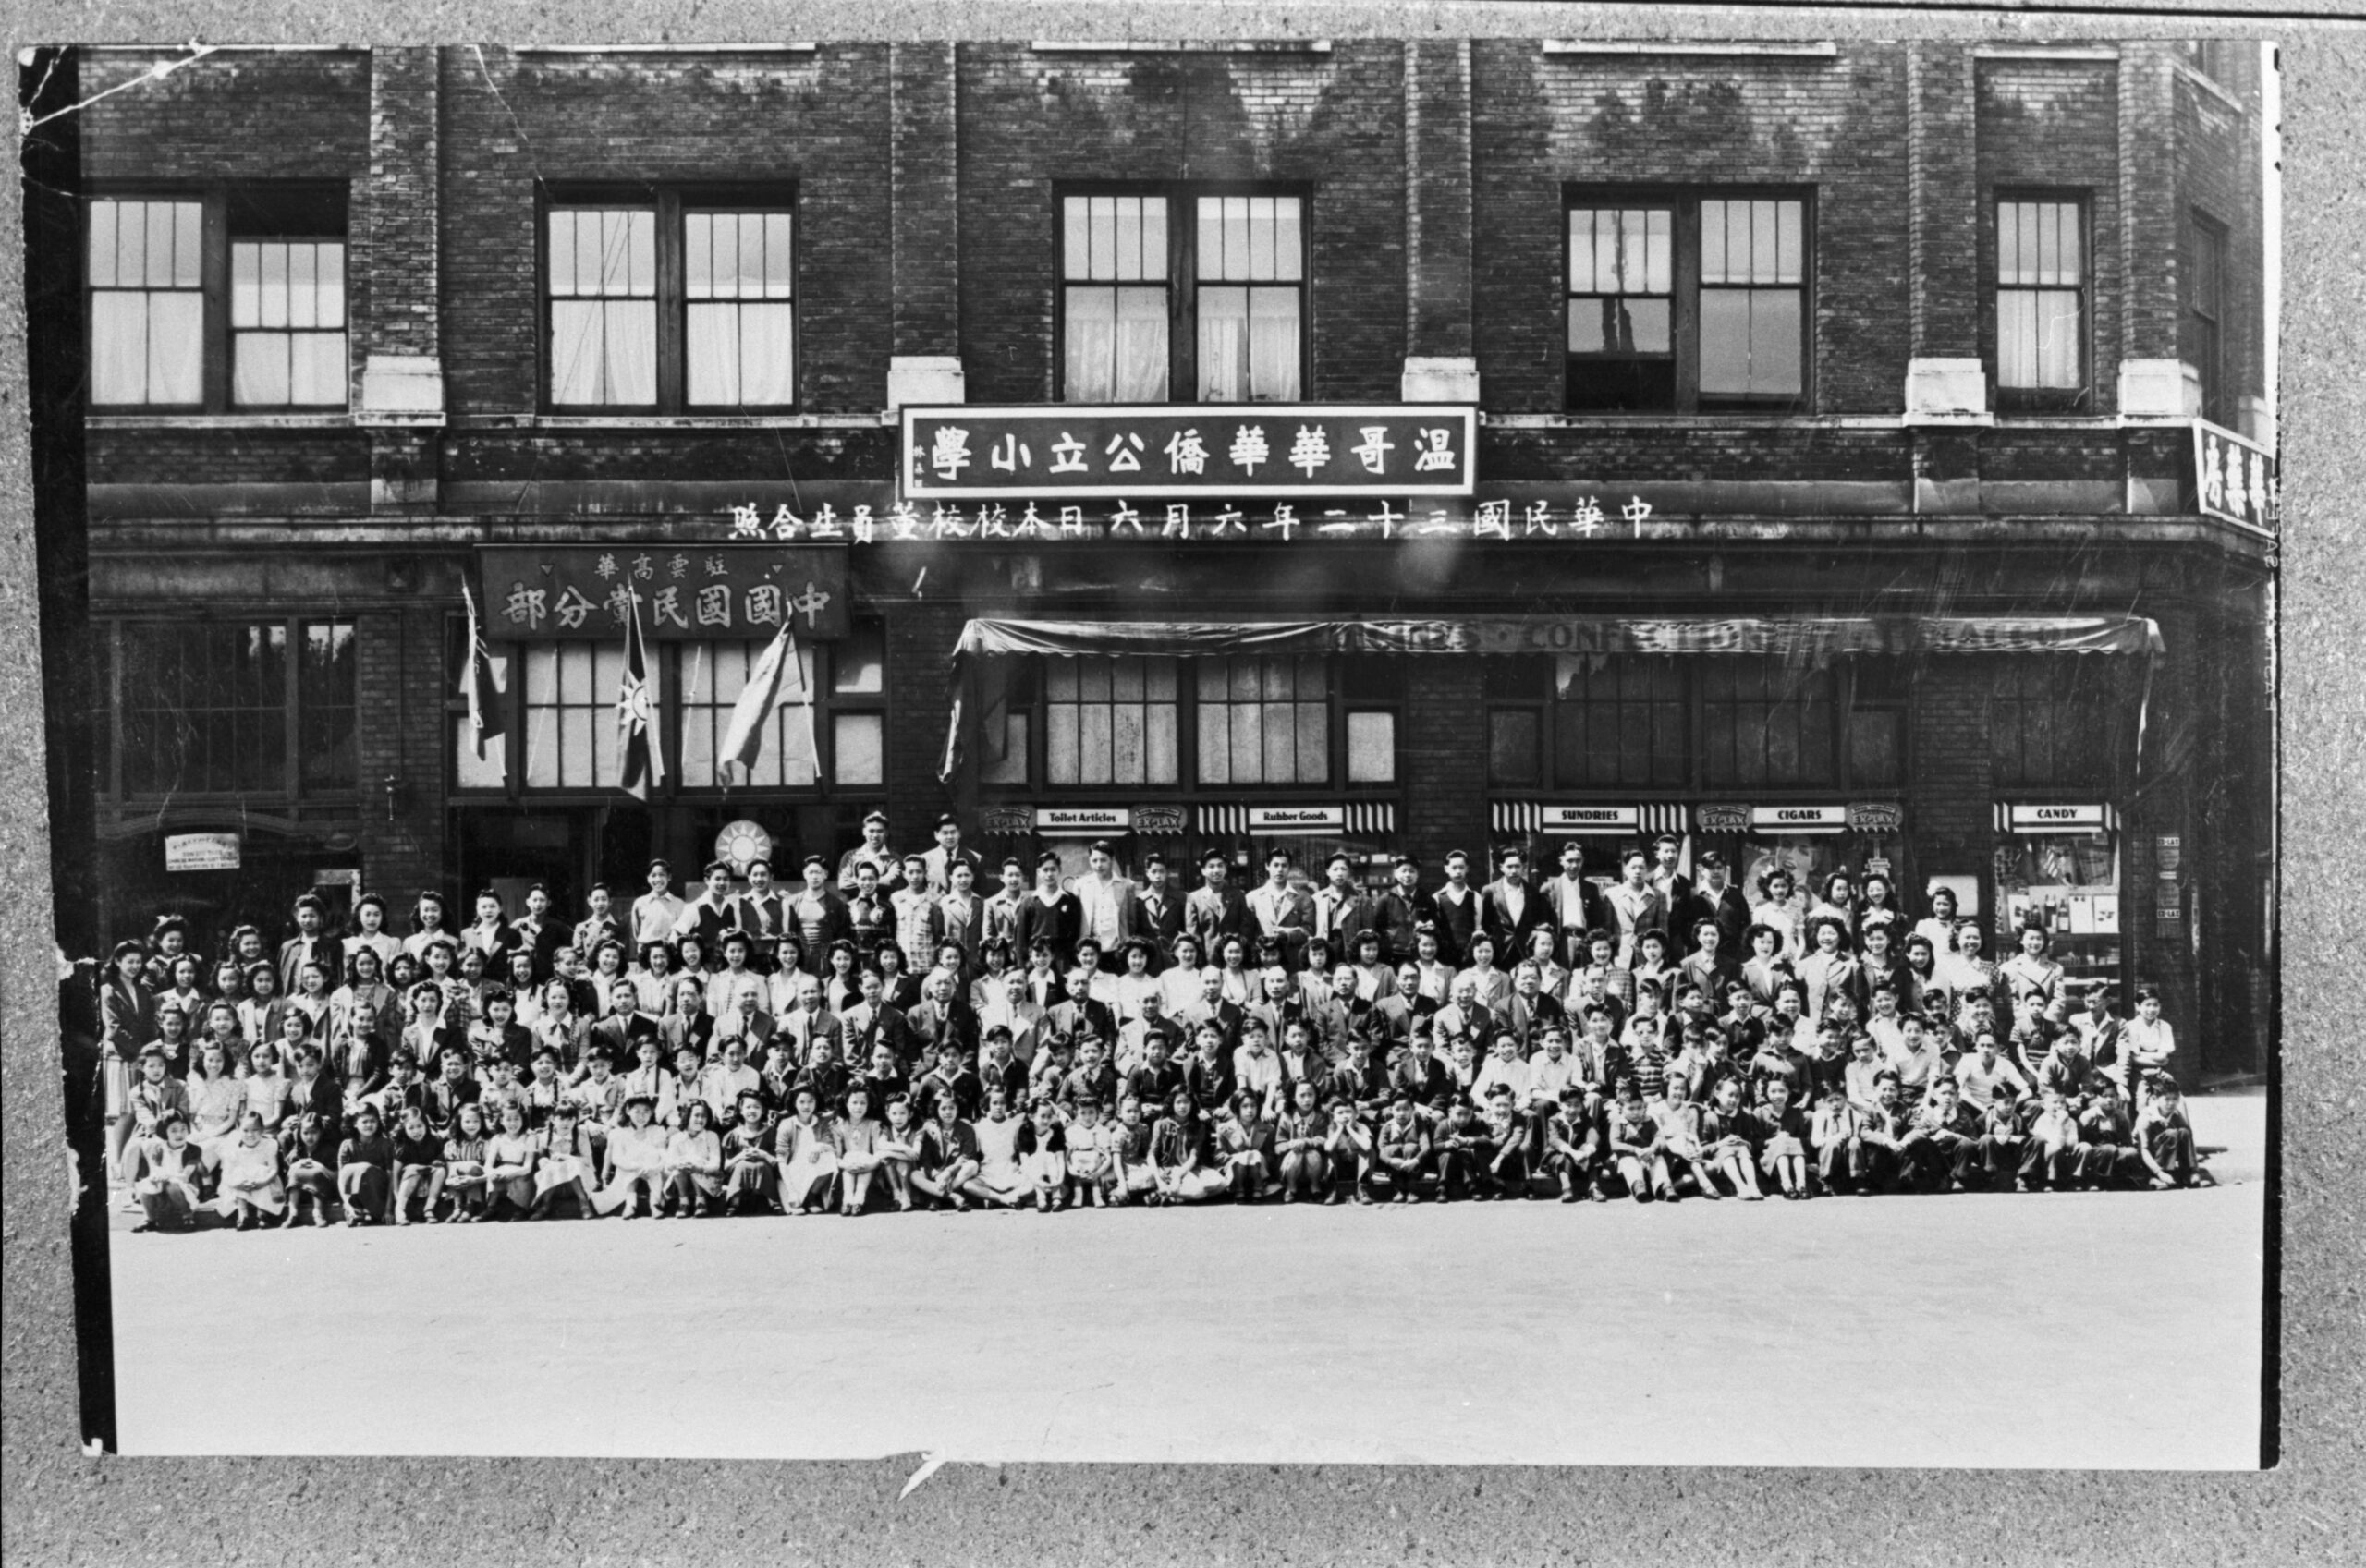 around 100 students pose in front of a large brick building with chinese characters on the front